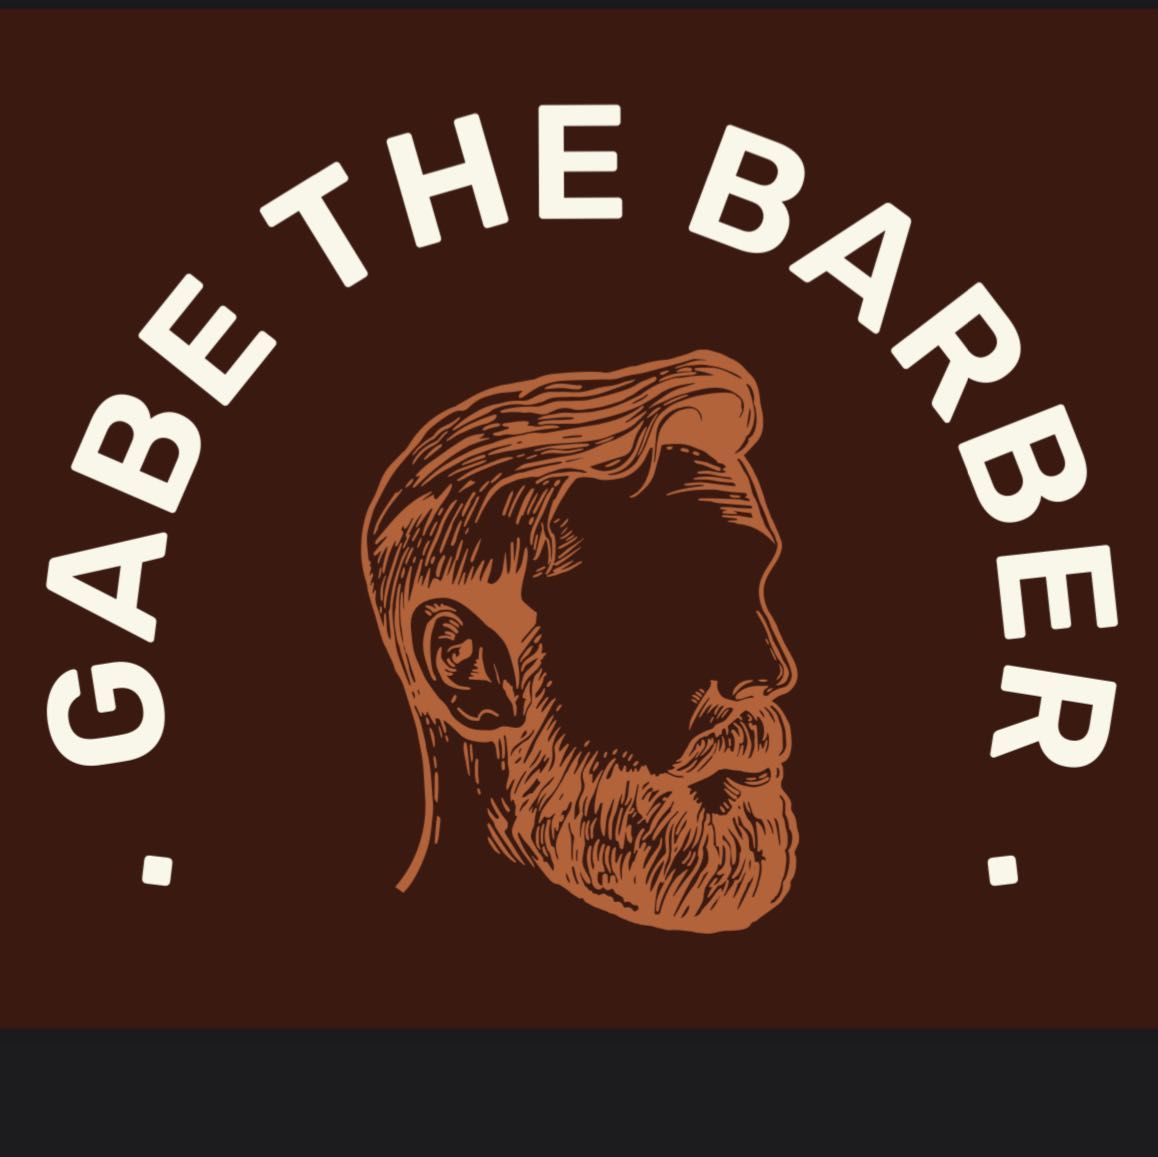 Gabe The Barber, 10395 Narcoossee Rd, Suite c, Orlando, 32832